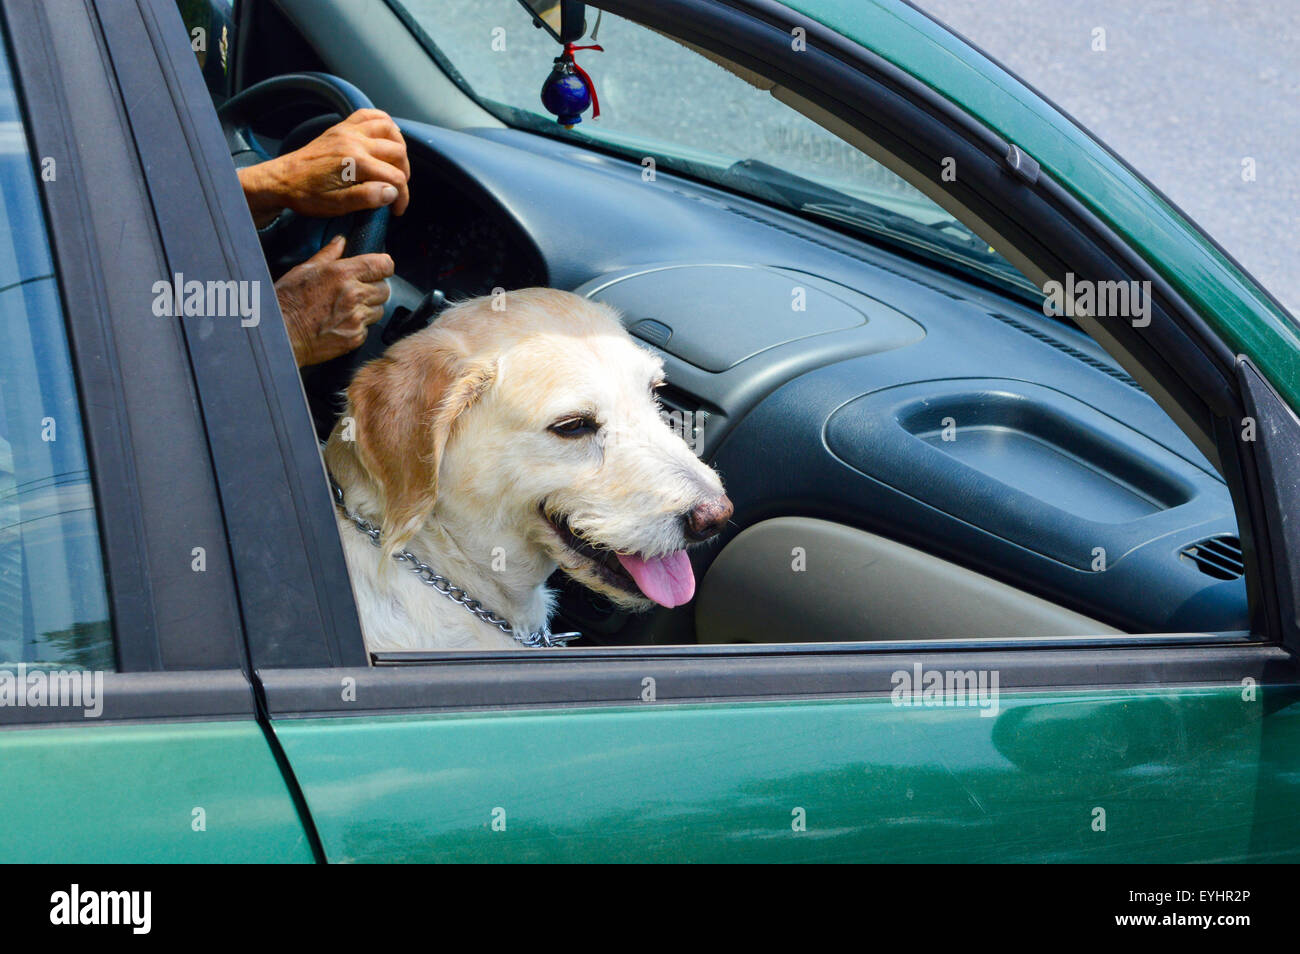 Cute golden retriever dog riding in a car while sitting like human with his tongue out looking through window Stock Photo